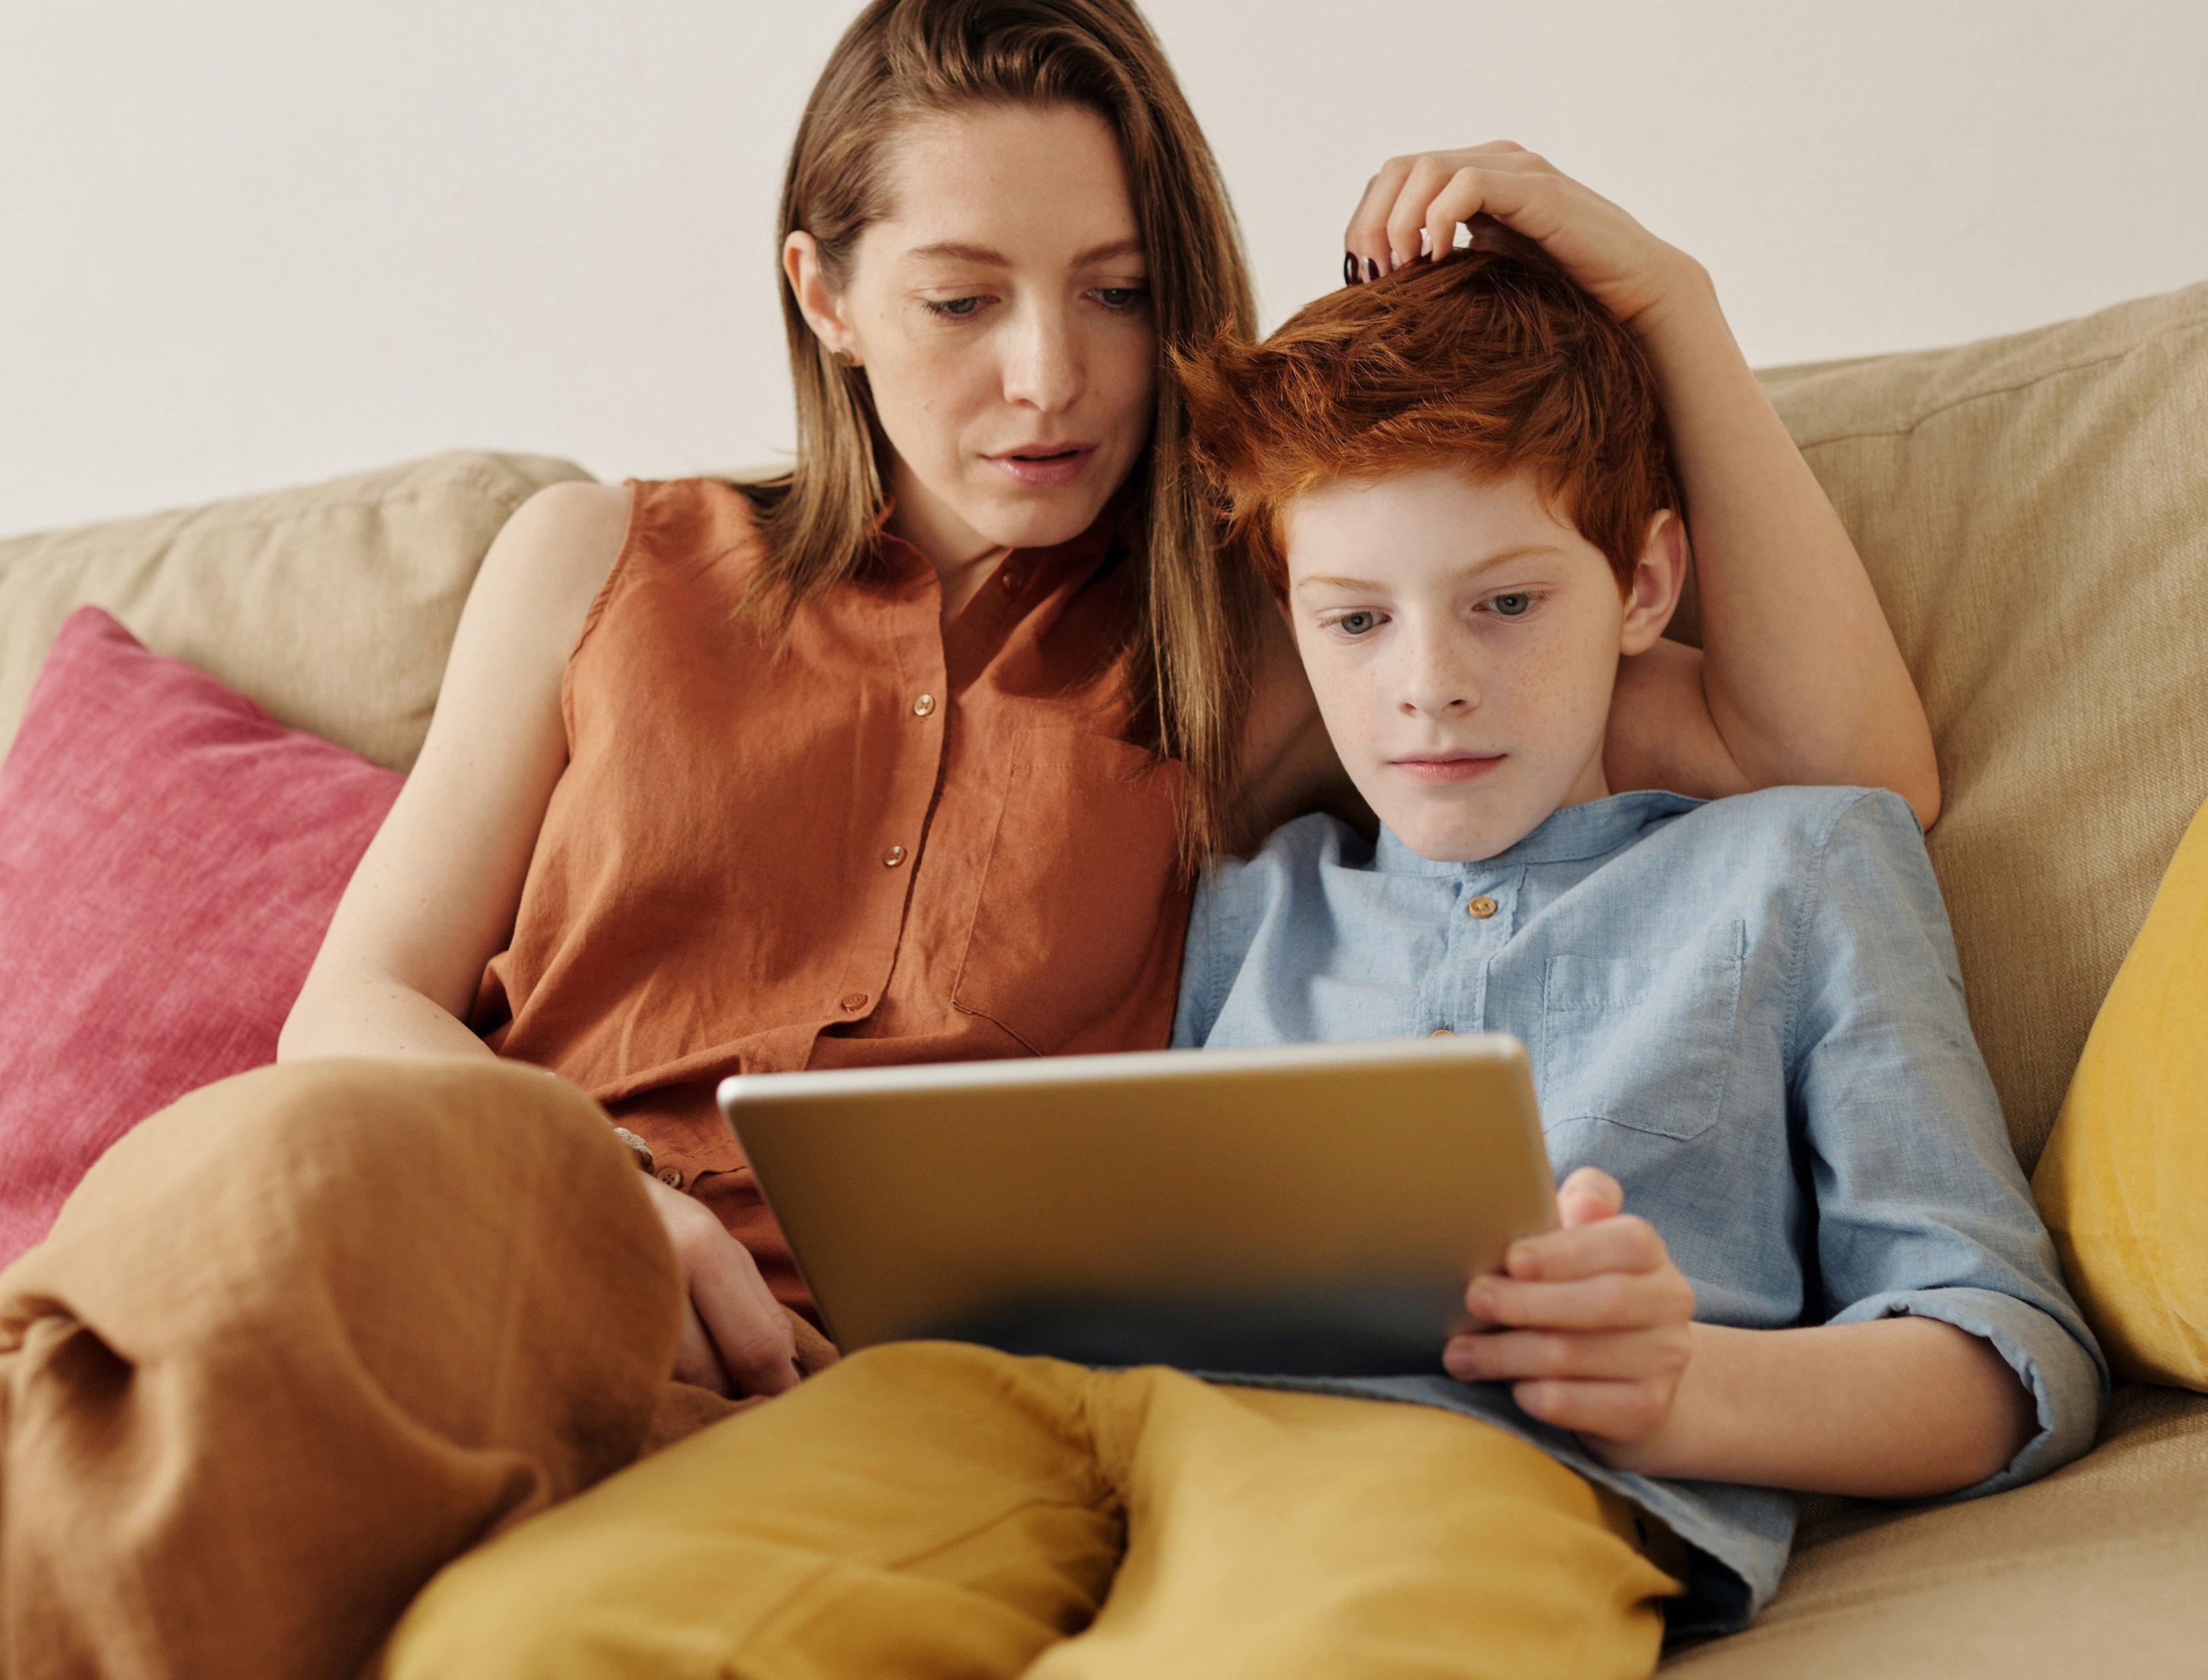 Parent and Son at home on the sofa, looking at an iPad together. Home-based Program Helps Families Find Calm in Child Behavior Modification